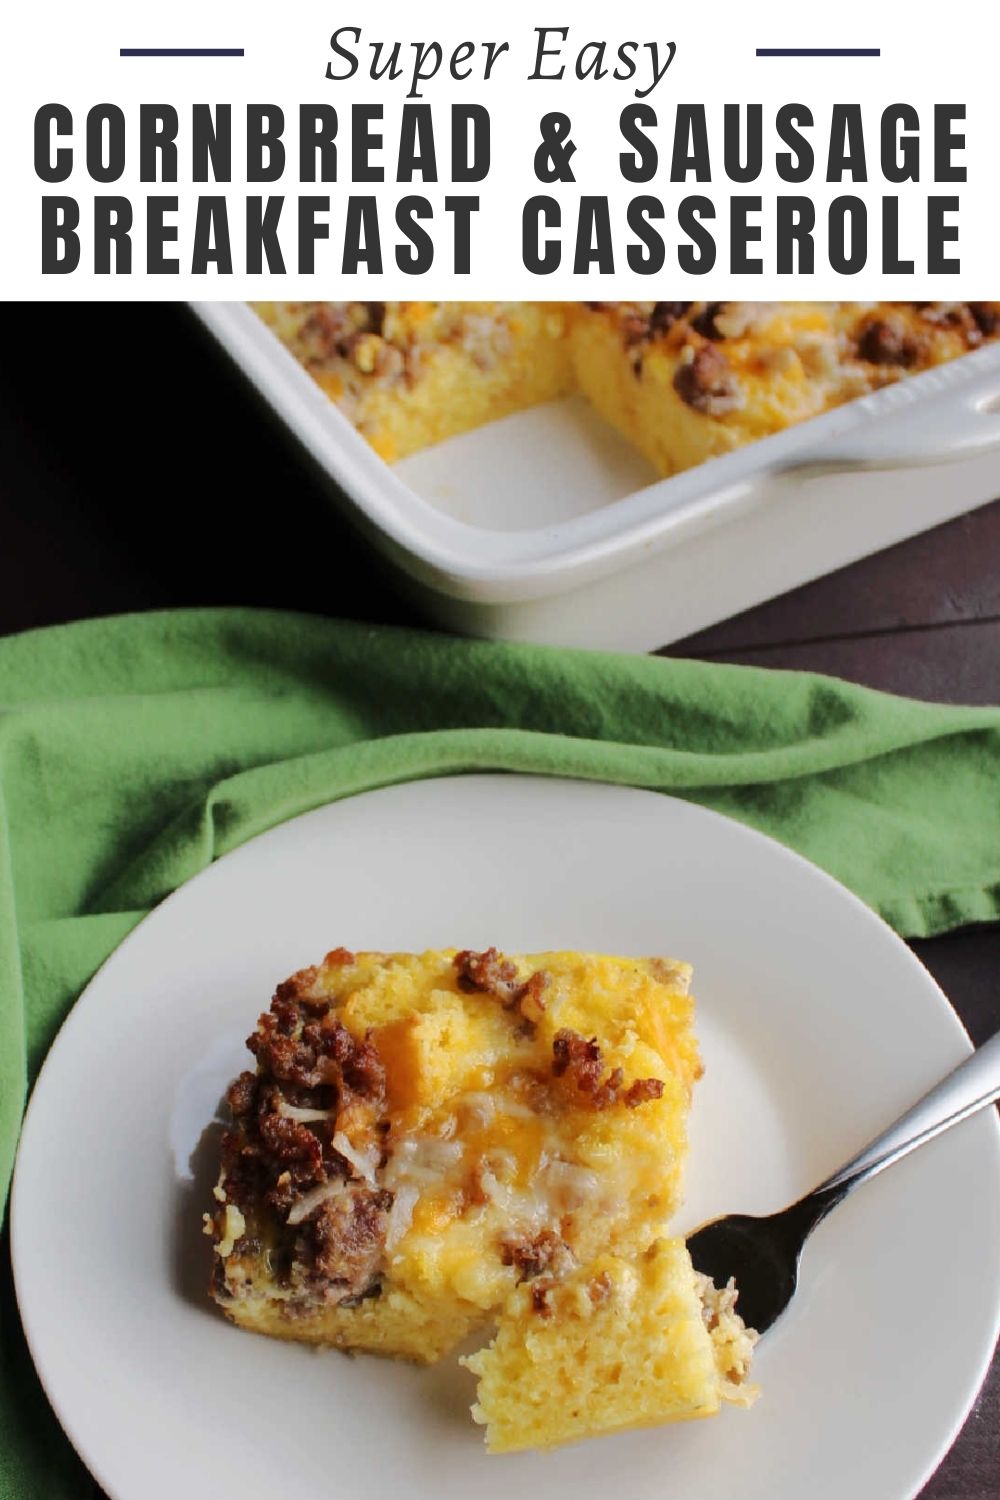 Cornbread and sausage breakfast casserole can be a little bit sweet and a little bit savory. It is easy to make and is a hearty meal to start your day off on the right foot.